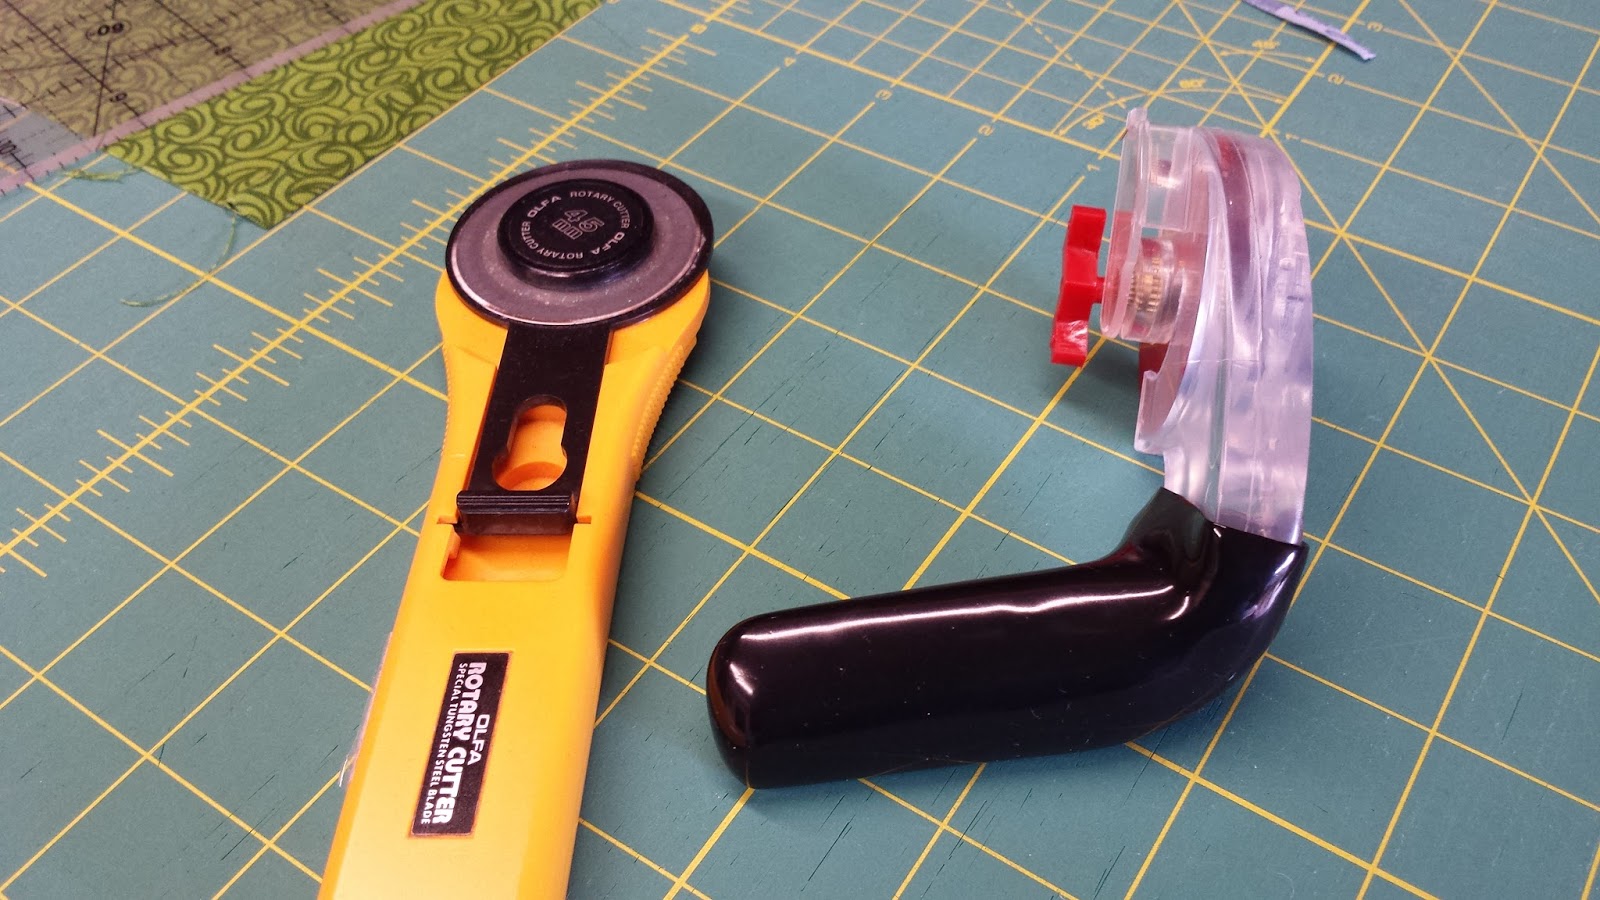 DON'T WAIT TO CREATE: The Martelli Rotary Cutter